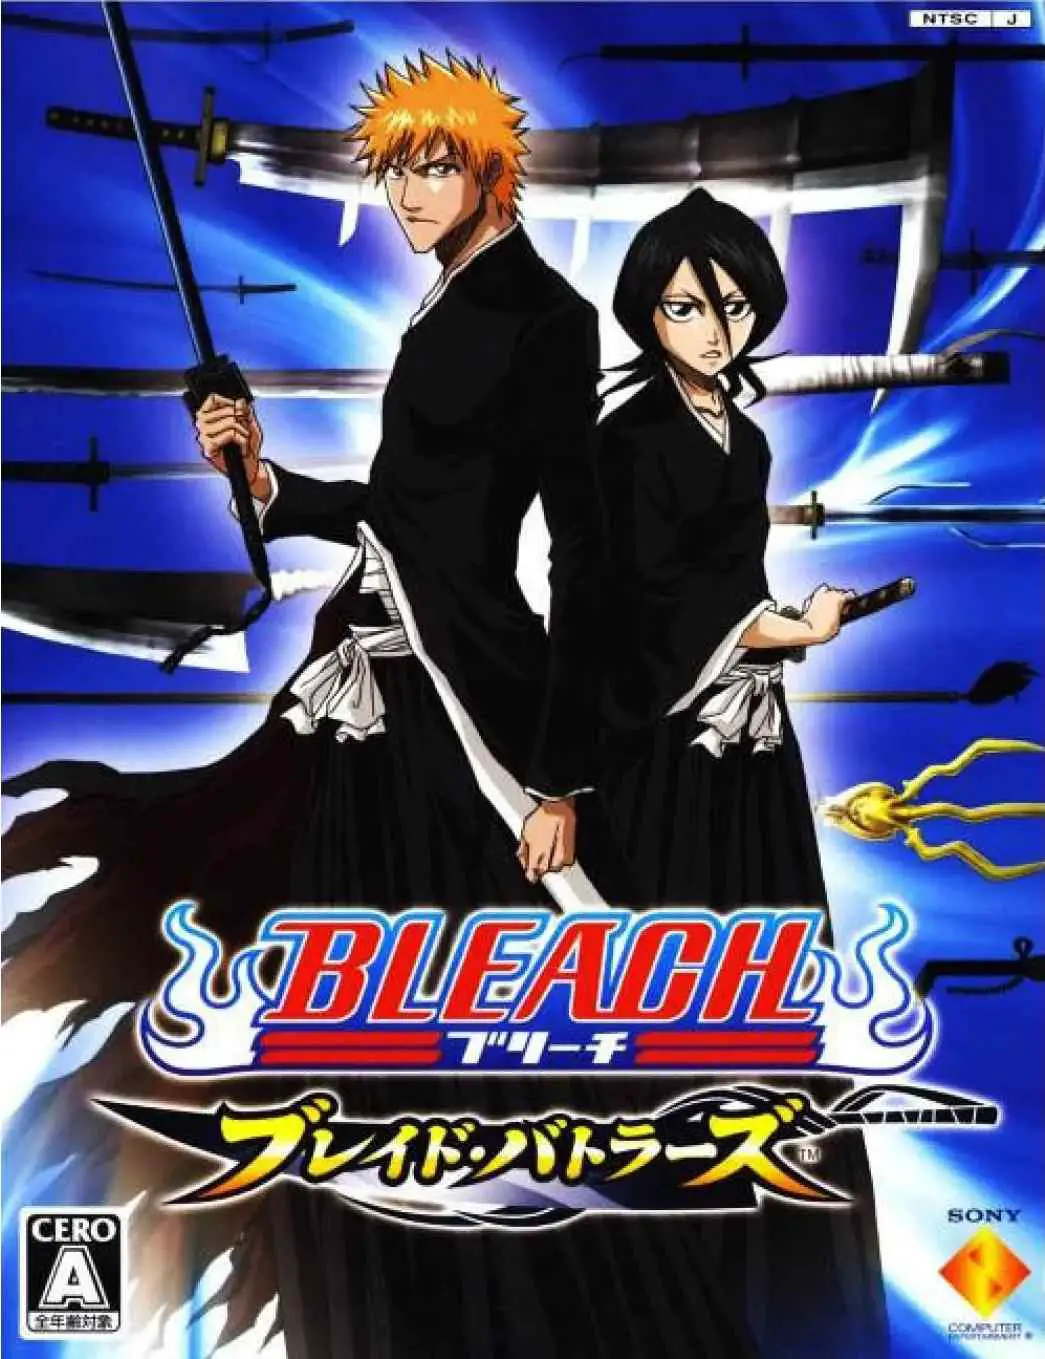 The excellent game Bleach: Blade Battlers is a 2006 Sega PS2 fighting game by Raijin.